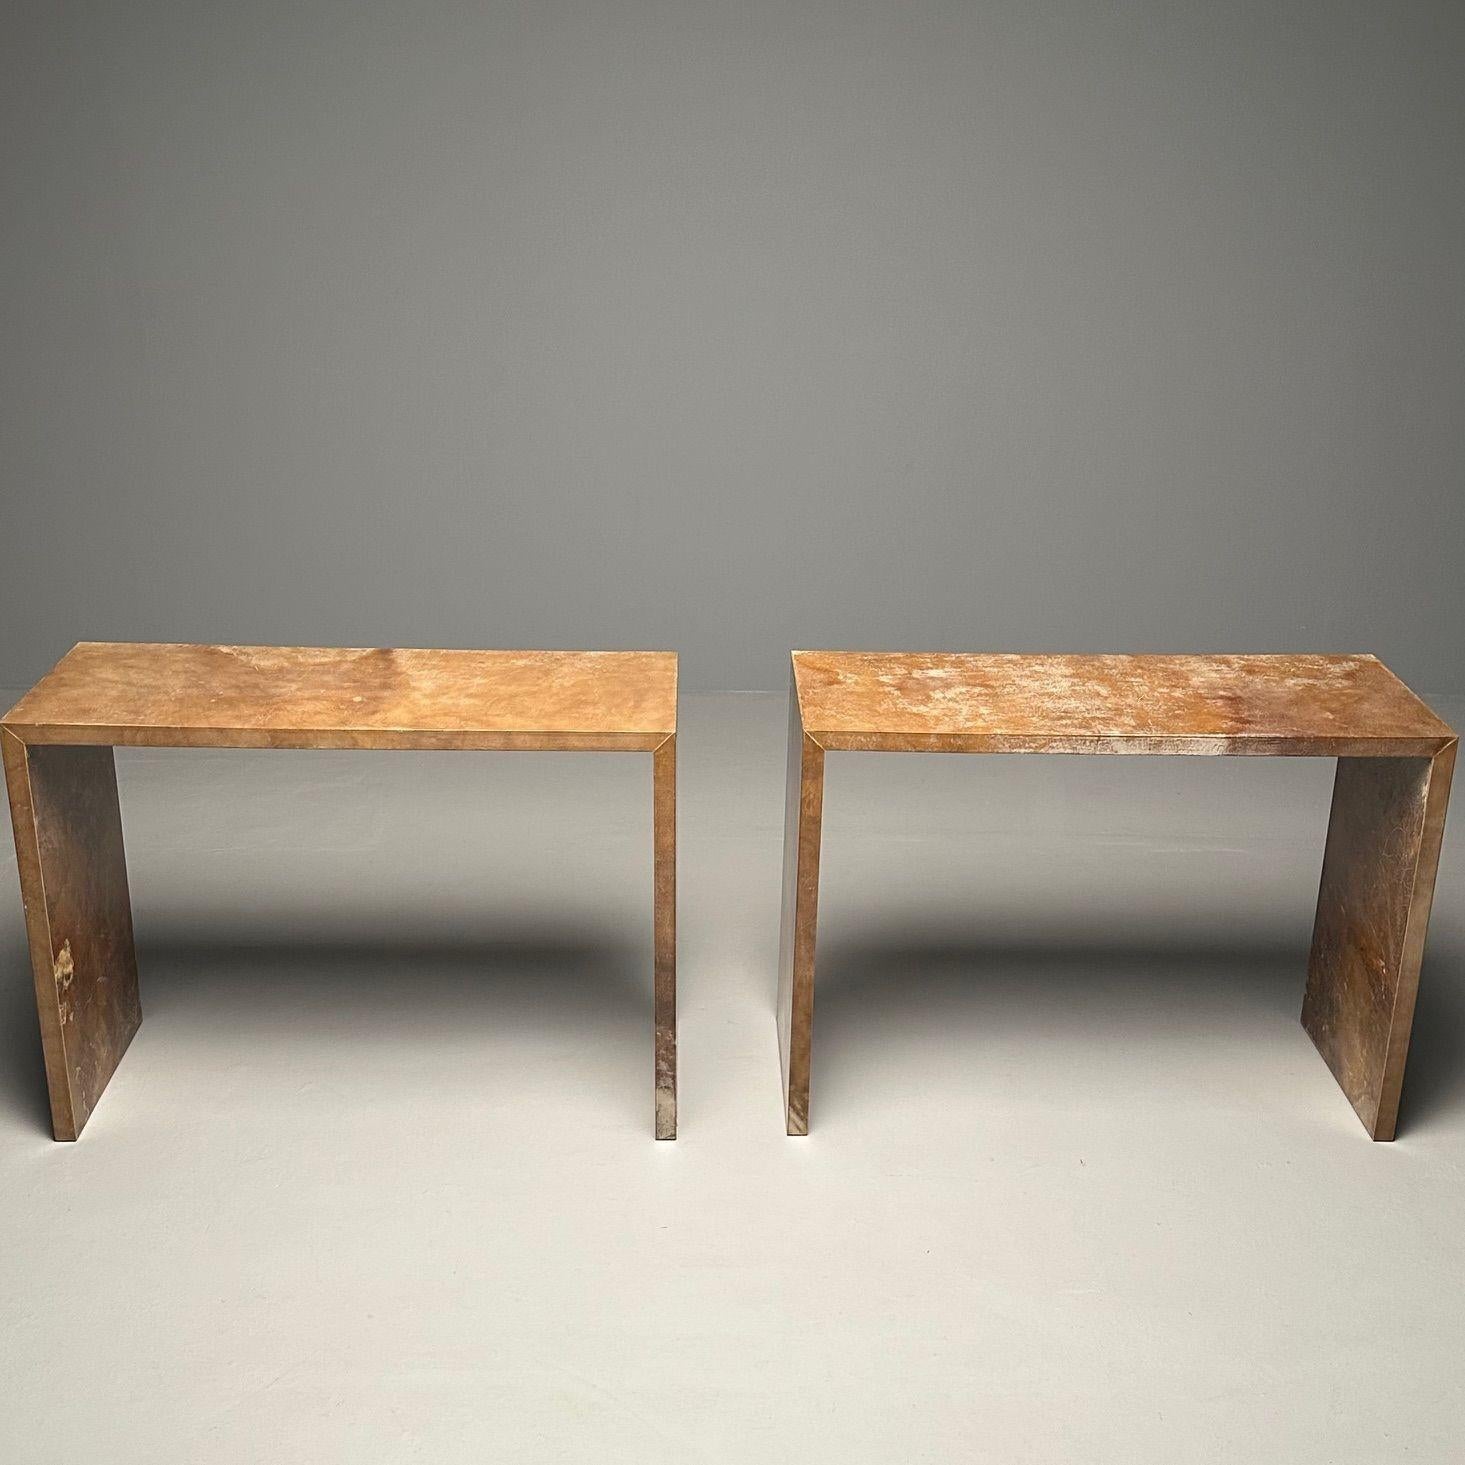 20th Century Jean-Michel Frank Style, Contemporary, Parchment Consoles, Sofa Tables, 2020s For Sale